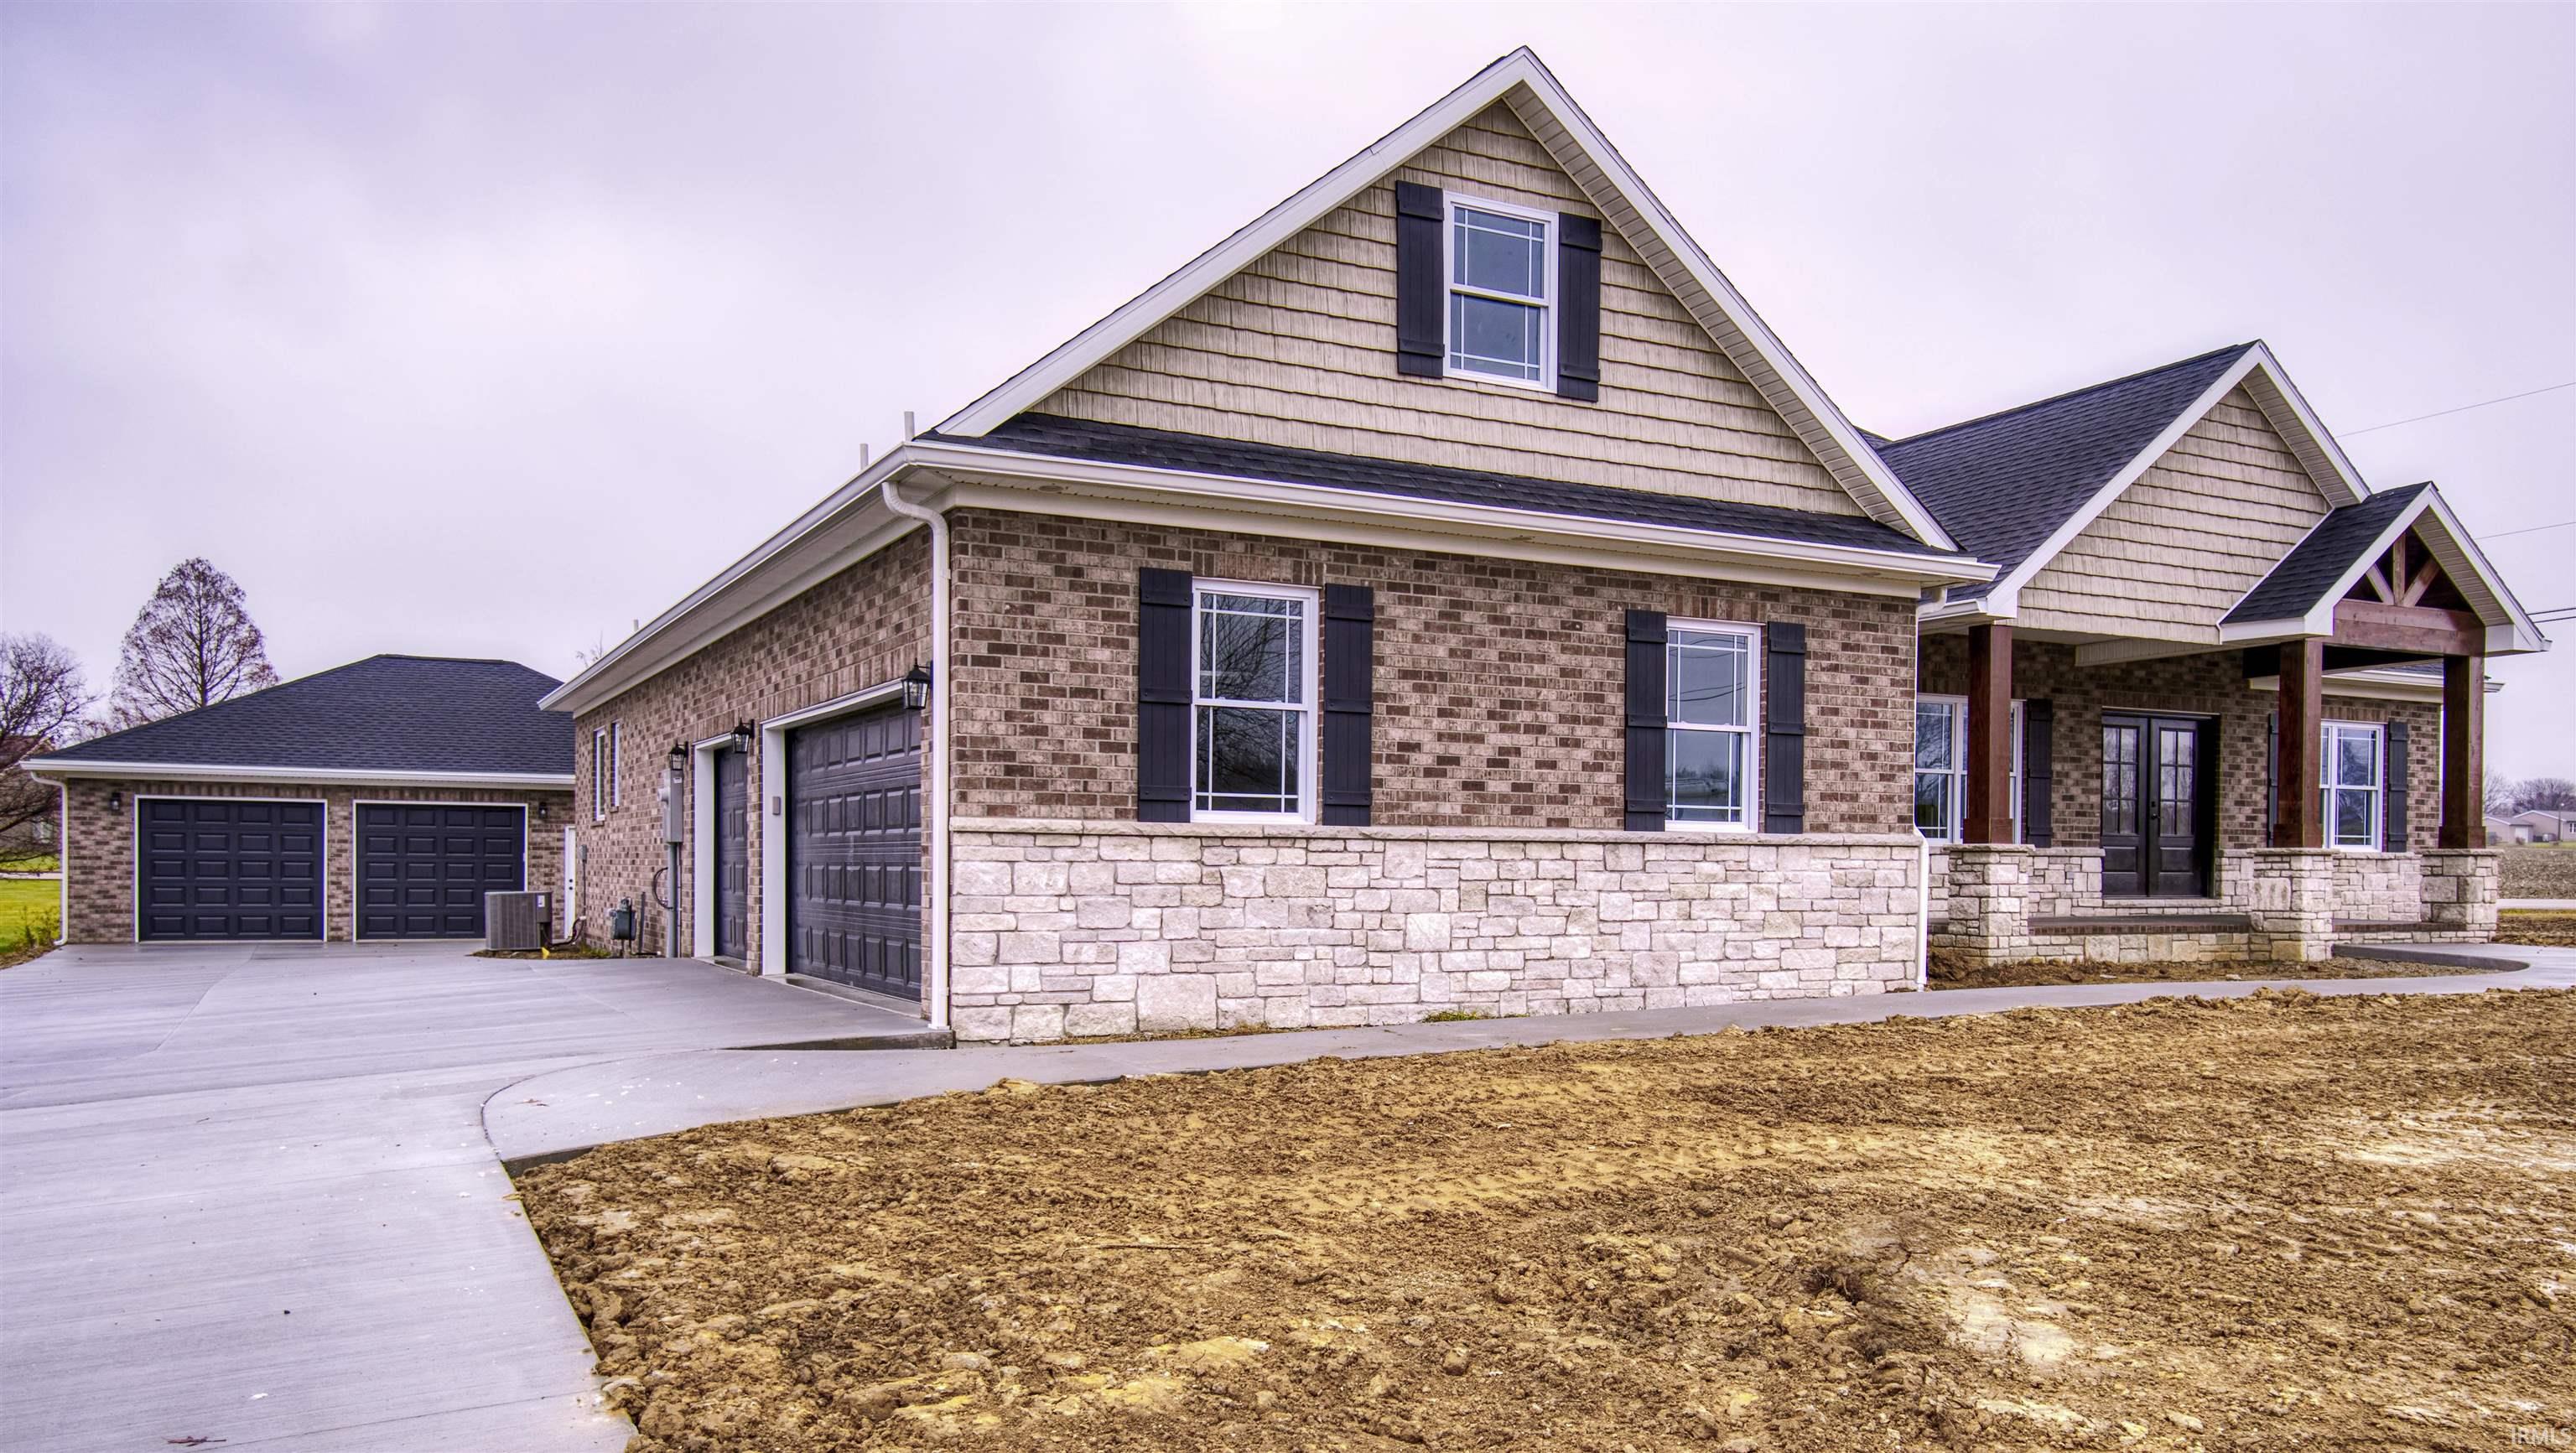 This home has great curb appeal with stone accents...covered front porch...side load garage!